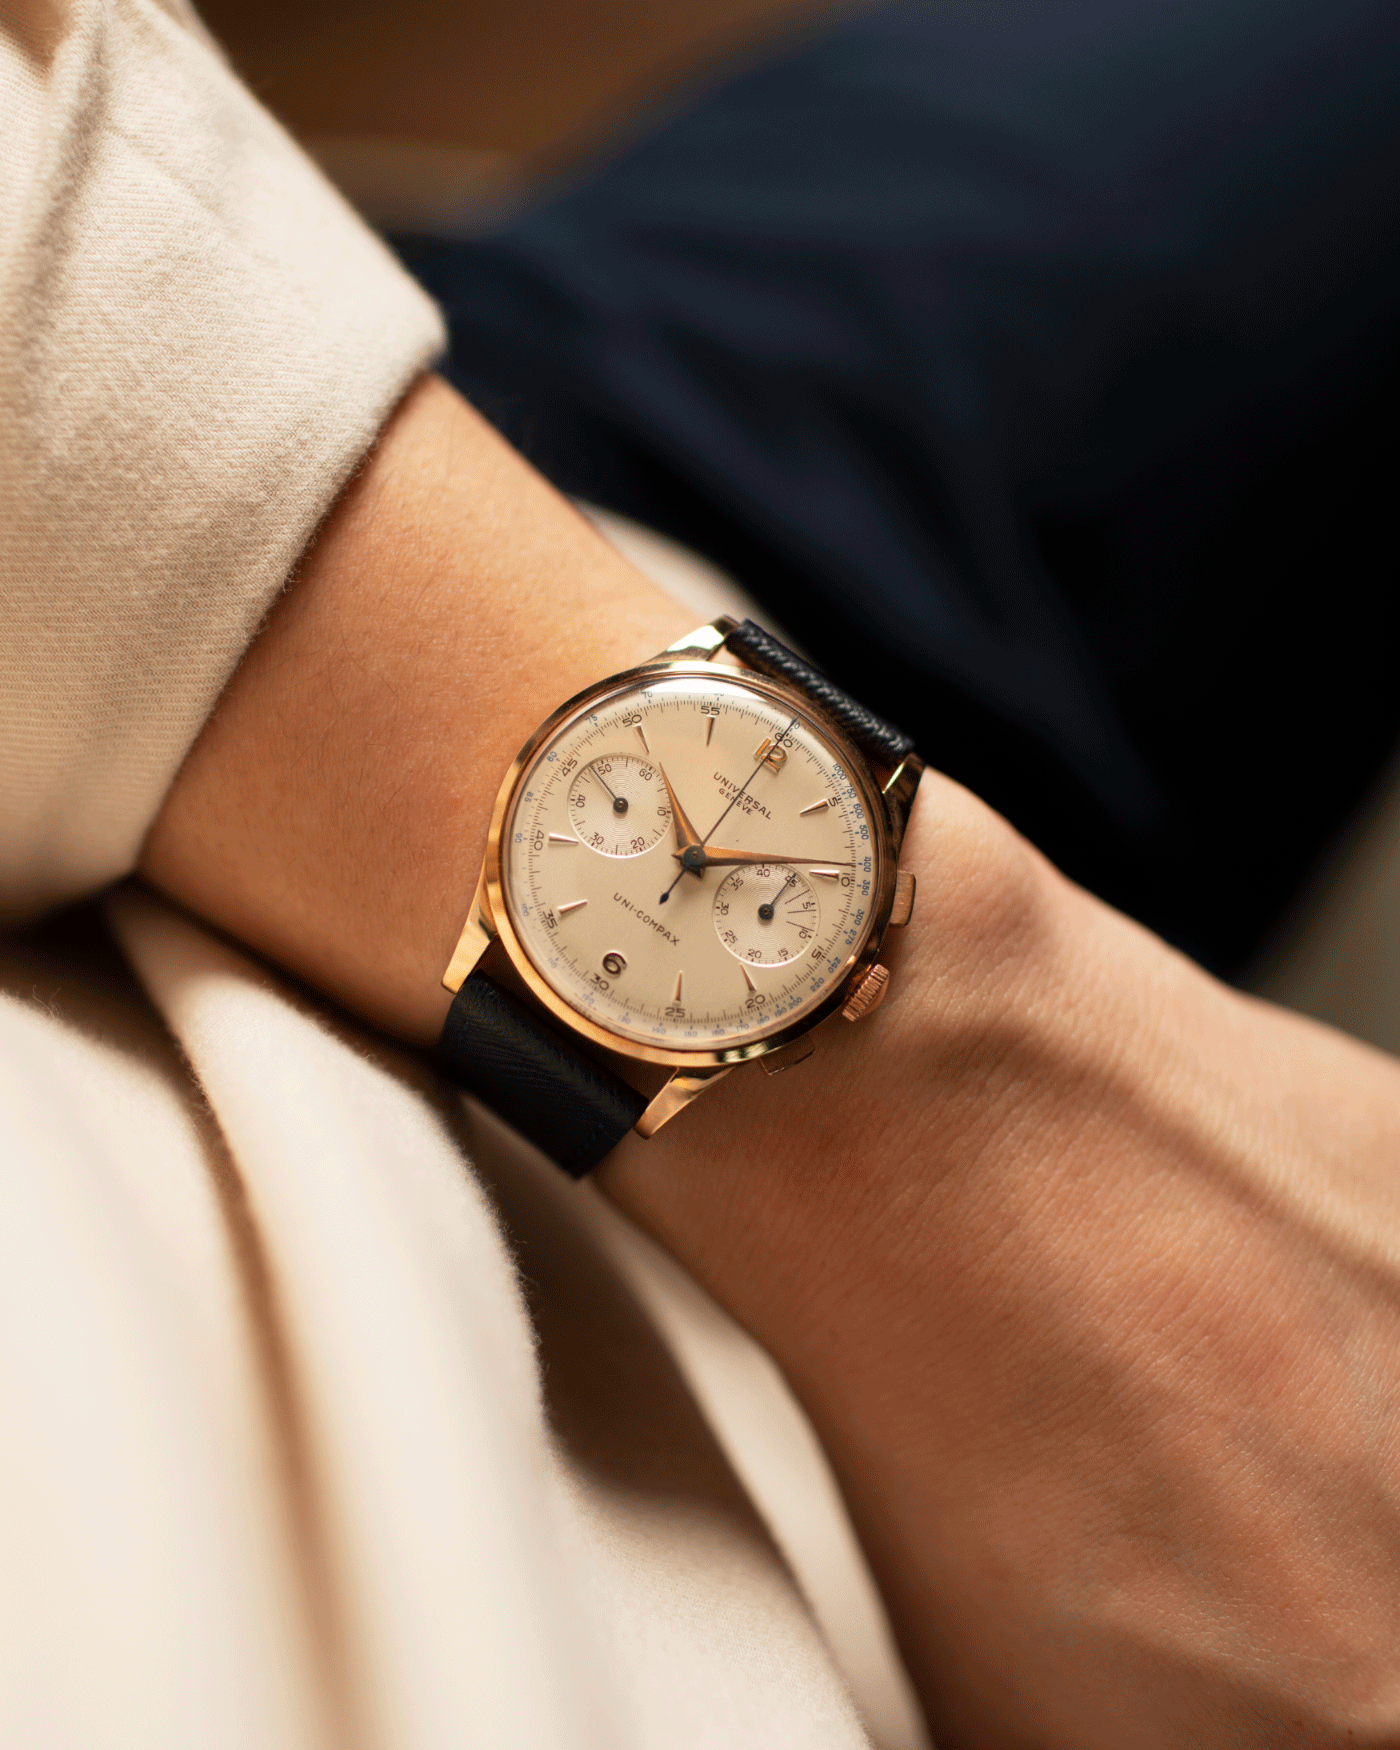 Brand: Universal Geneve Year: 1950’s Model: Uni-Compax Reference Number: 124103 Serial Number: 1550986 Material: 18k Pink Gold Movement: UG Cal. 285 Case Diameter: 37mm Lug Width: 20mm Bracelet/Strap: Molequin Navy Blue Textured Calf